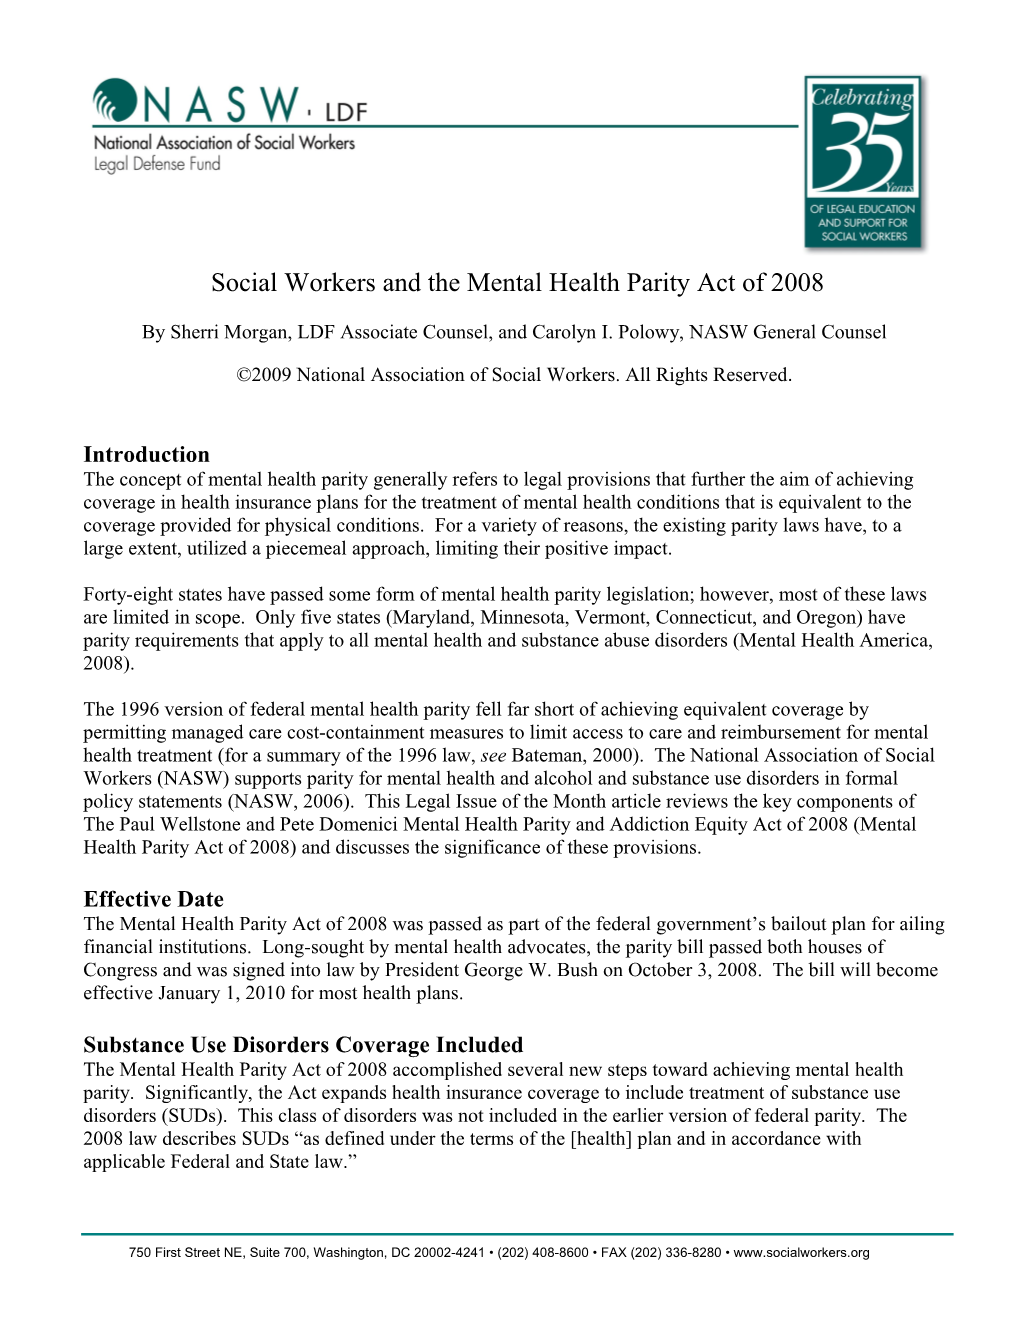 Social Workers and the Mental Health Parity Act of 2008